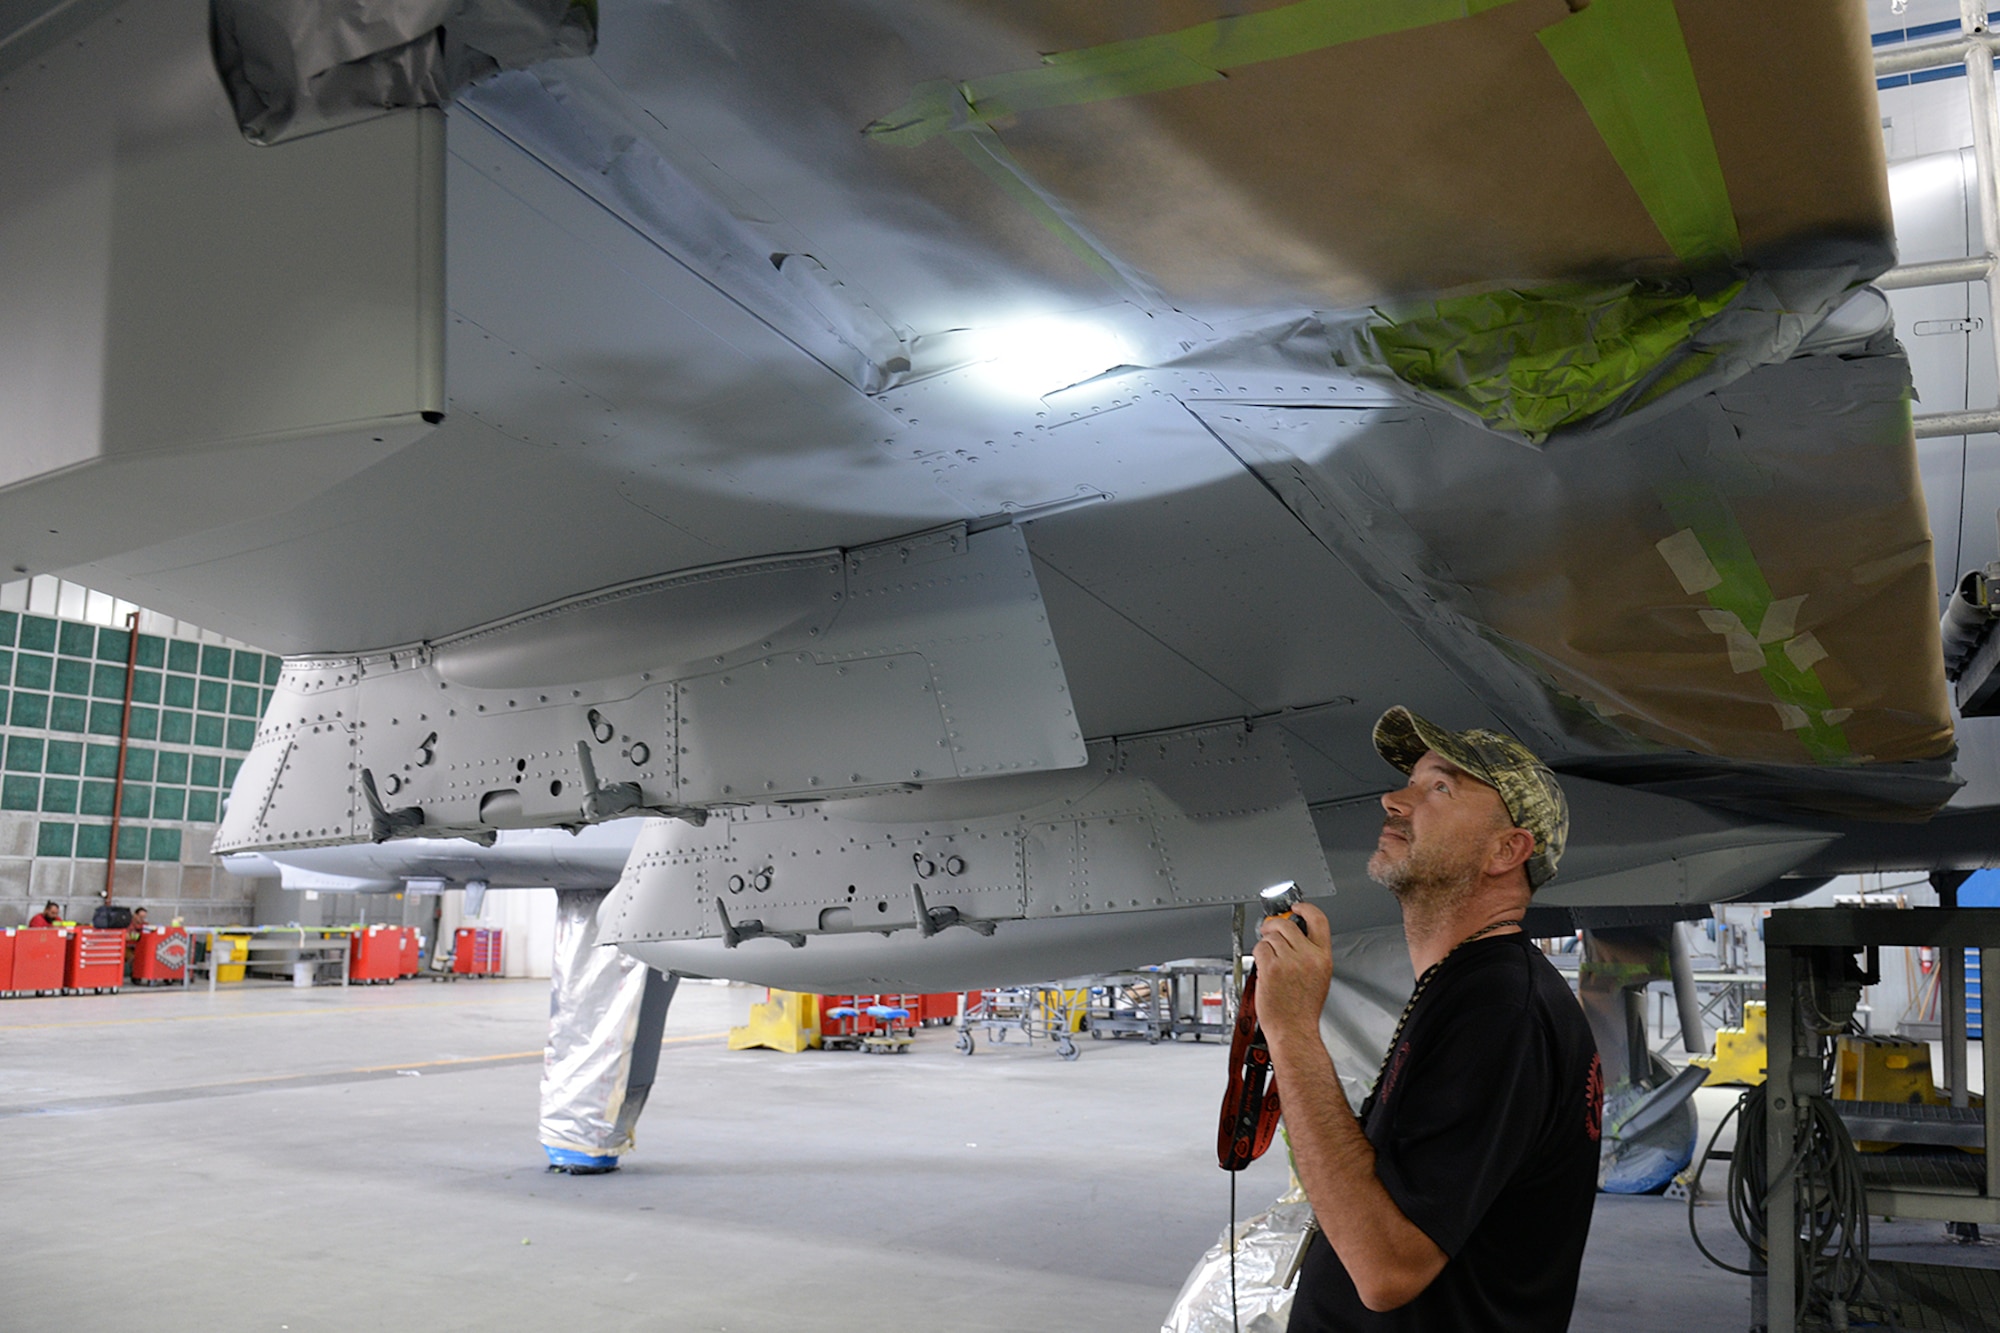 576th Aircraft Maintenance Squadron corrosion control painter Dale Benoit inspects newly applied paint on the underside of the new wing of an A-10 Thunderbolt II, tail no. 80-0252, at Hill Air Force Base, Utah, July 3, 2019. The aircraft was the last of 173 A-10s to receive new wings under the Enhanced Wing Assembly program to extend the flying service life of the fleet.  (U.S. Air Force photo by Alex R. Lloyd)